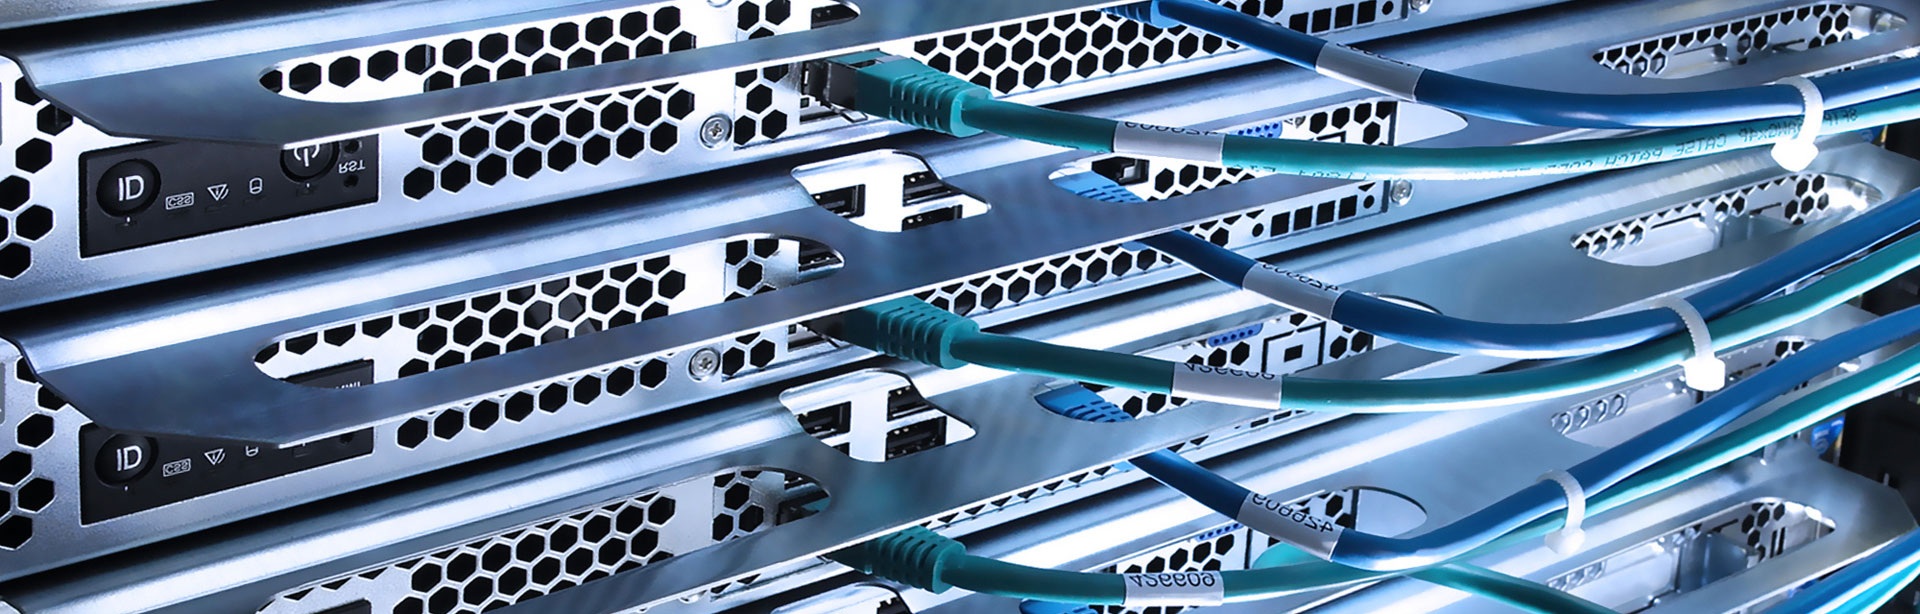 Rock Island IL Professional Voice & Data Network Cabling Services